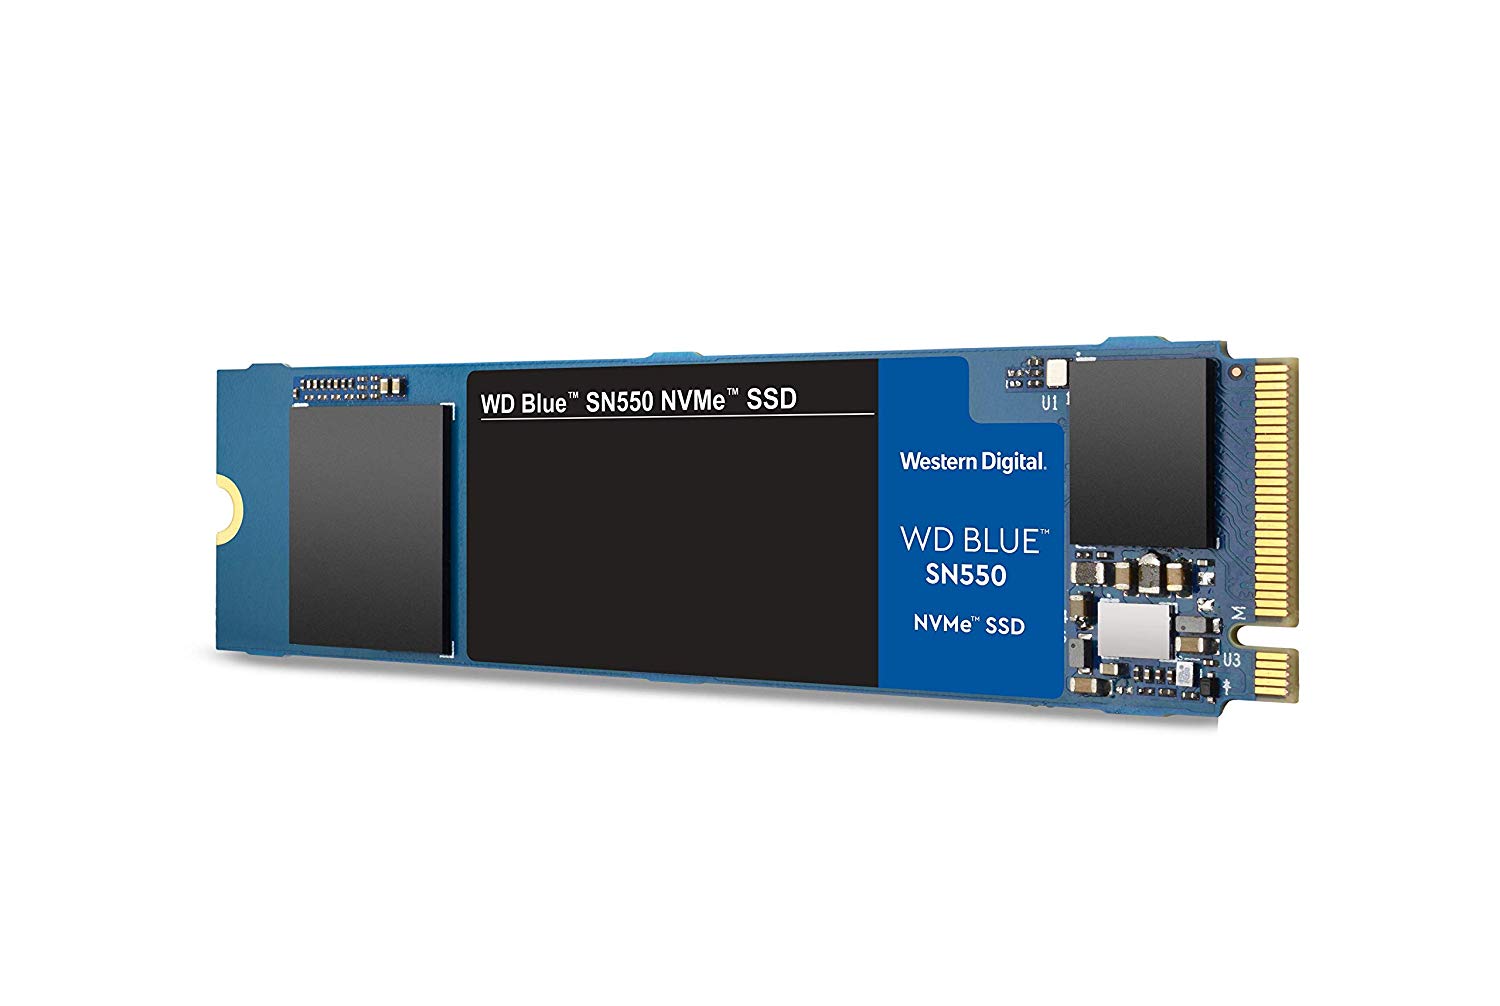 1TB WD Blue SN550 M.2 Gen3 x4 PCIe NVMe Internal SSD with 3D NAND for